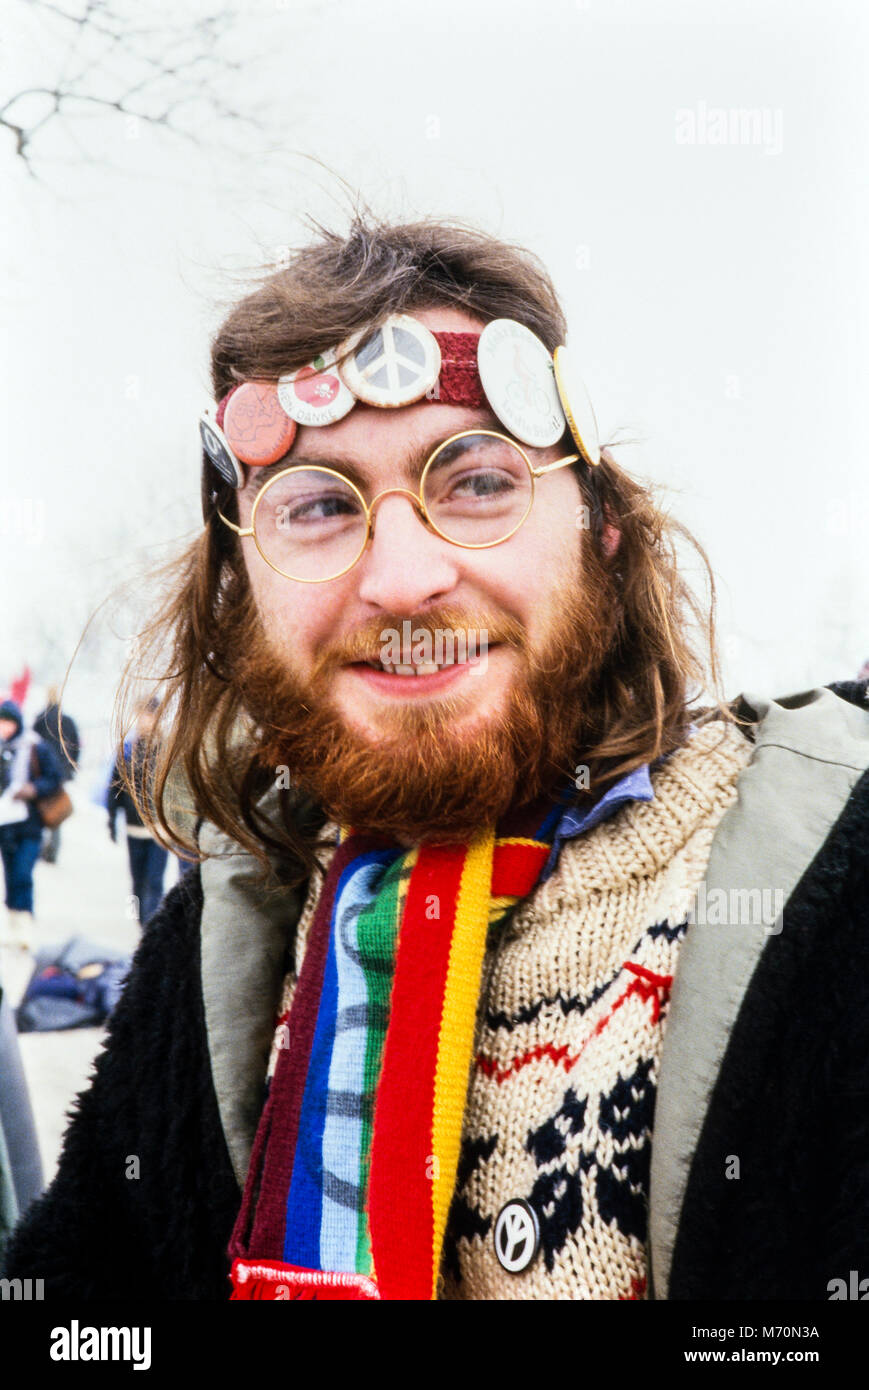 Bearded long haired man wearing headband with anti nuclear badges at the Anti cruise missile demonstration at the Molesworth missile base on 2nd February 1986 in snowy conditions. Cambridgeshire, England, UK, archival photograph, Stock Photo